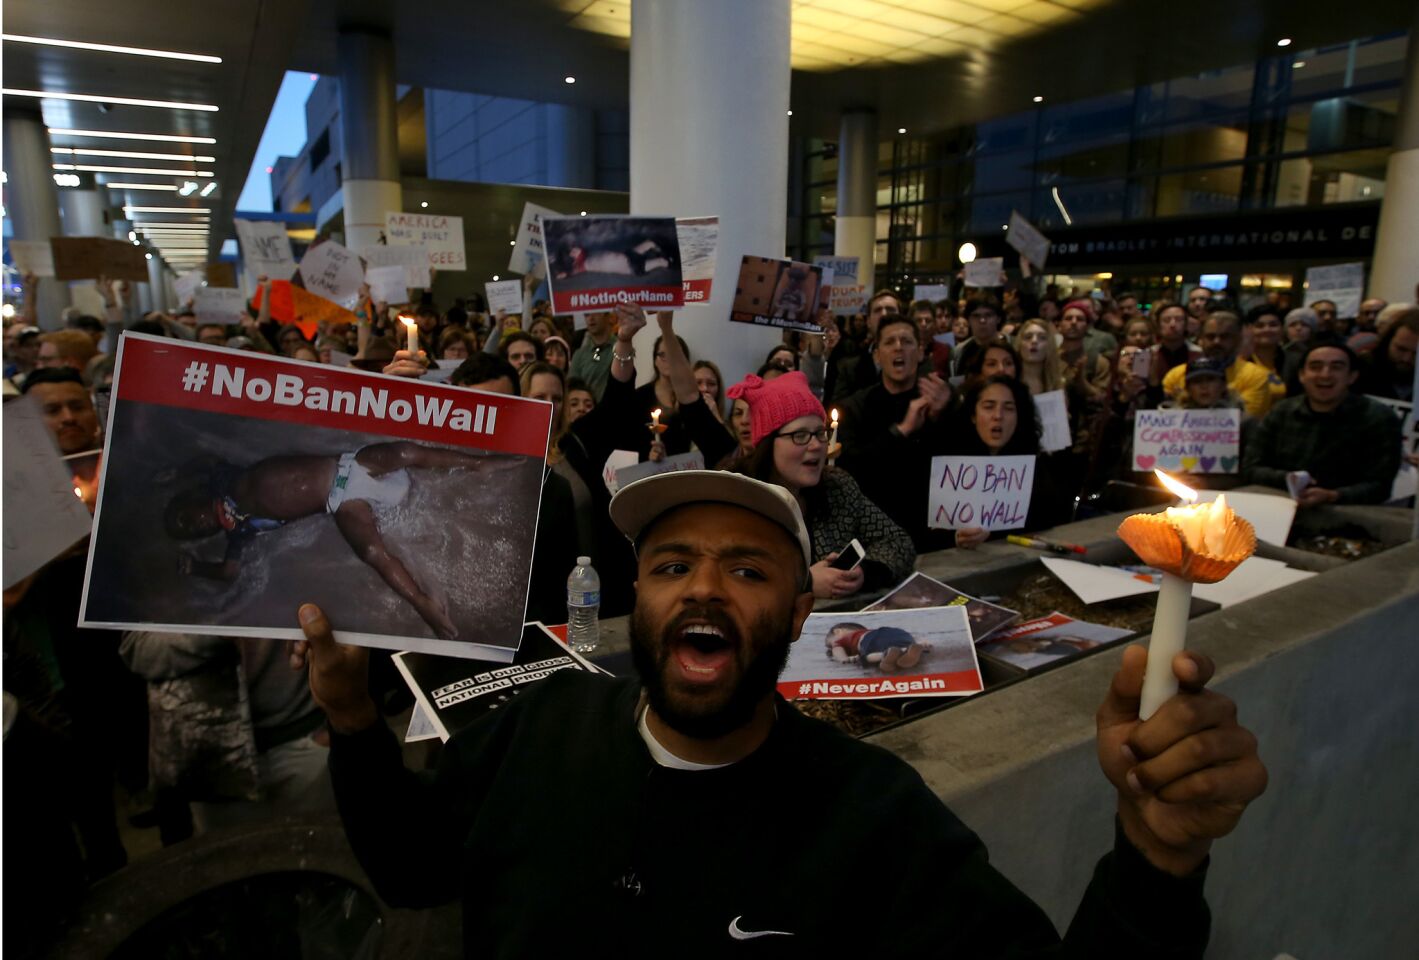 Protesters rally against the new immigration order at Tom Bradley International Terminal at LAX.